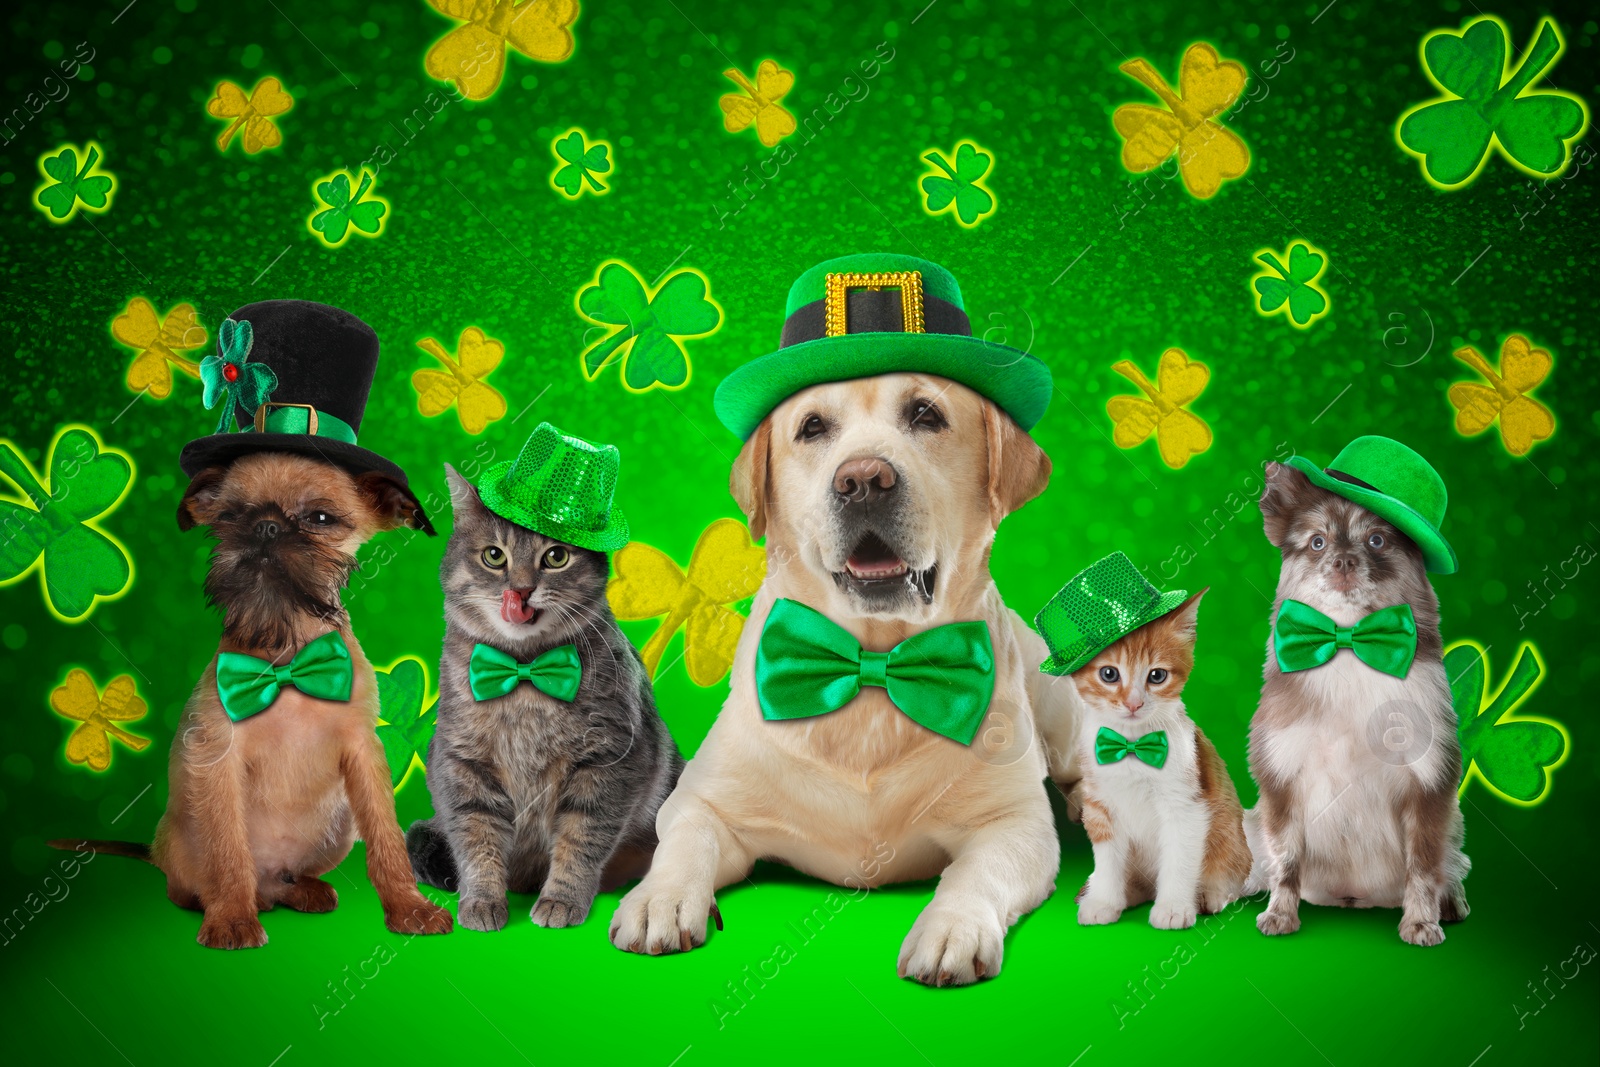 Image of St. Patrick's day celebration. Cute dogs and cats with festive accessories on green background